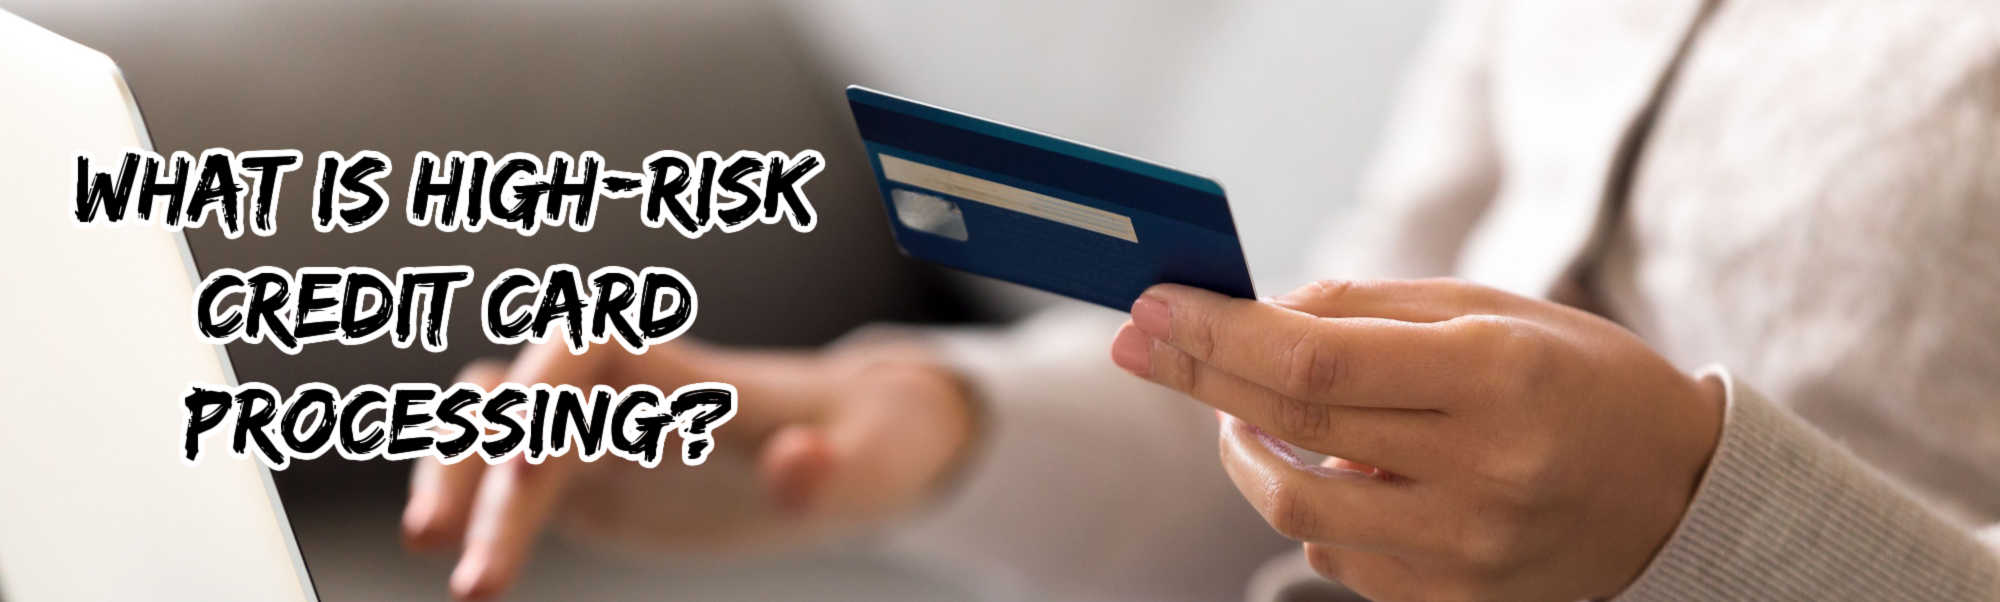 image of what is high risk credit card processing